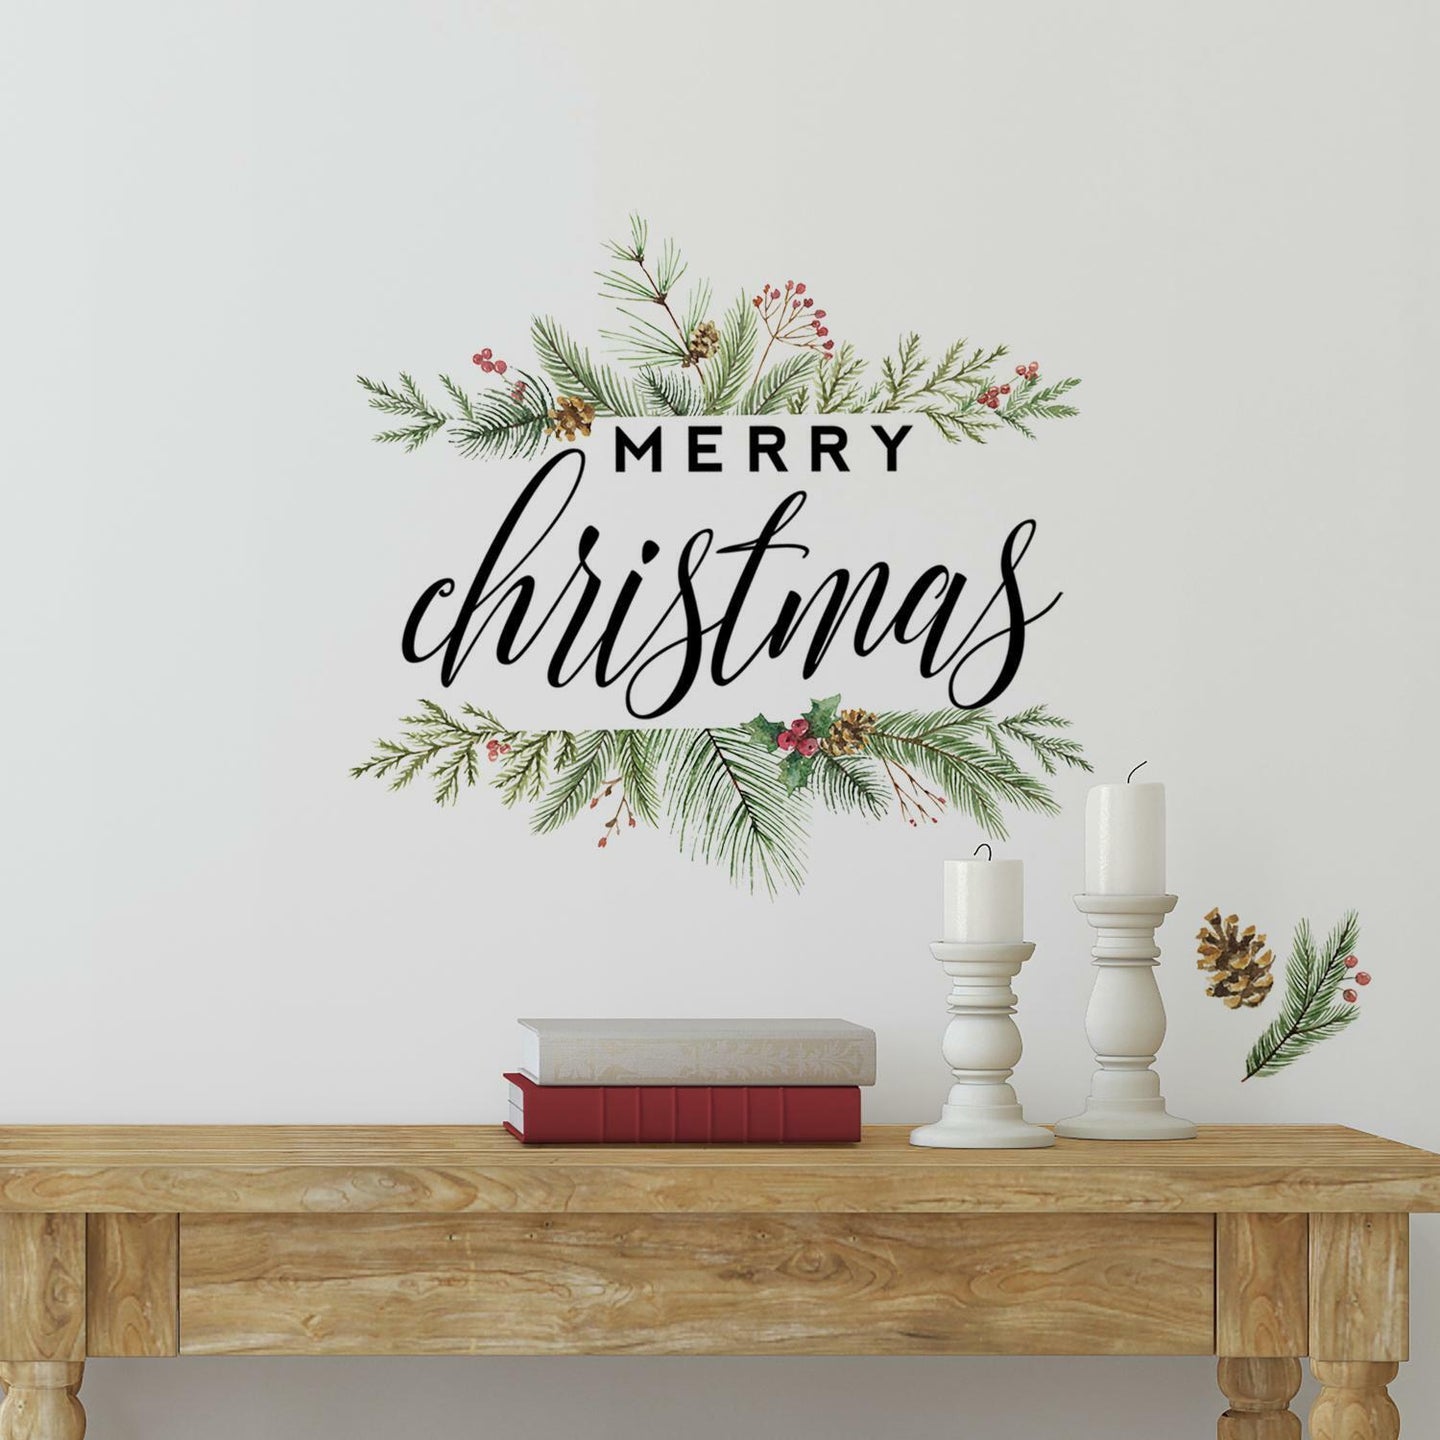 MERRY CHRISTMAS WREATH PEEL AND STICK WALL DECALS